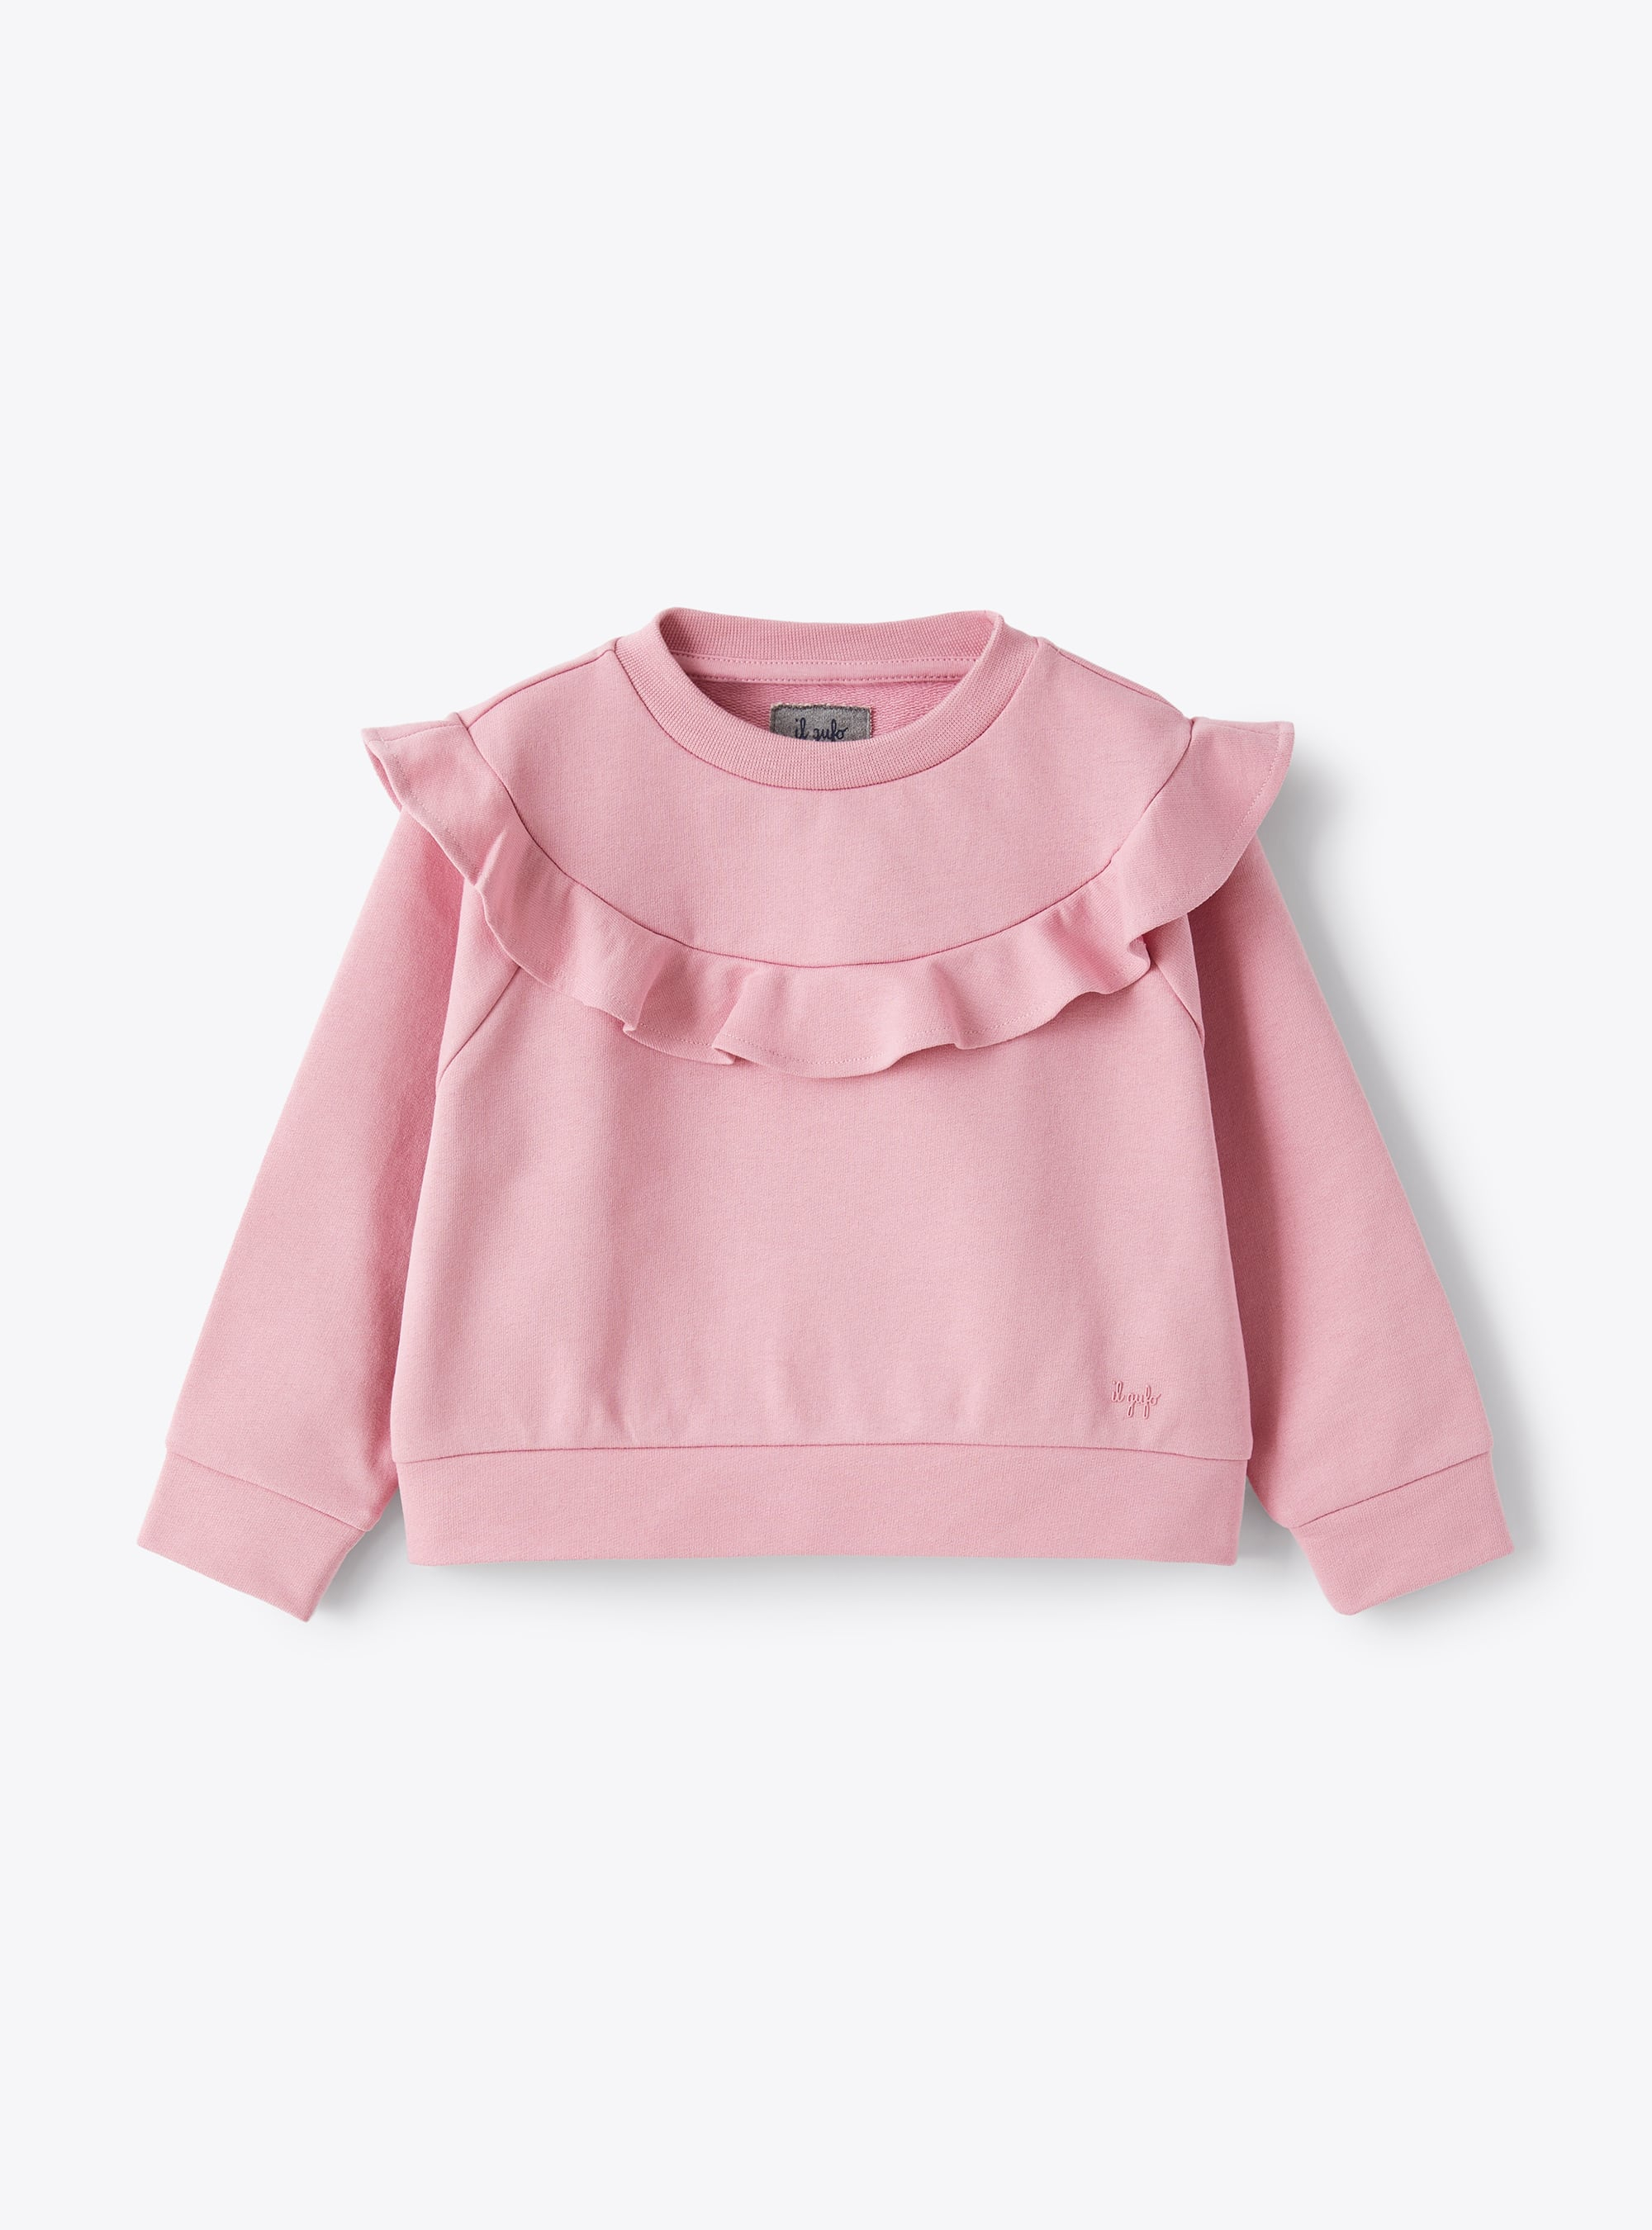 Sweatshirt in pink cotton with ruffle - Pink | Il Gufo